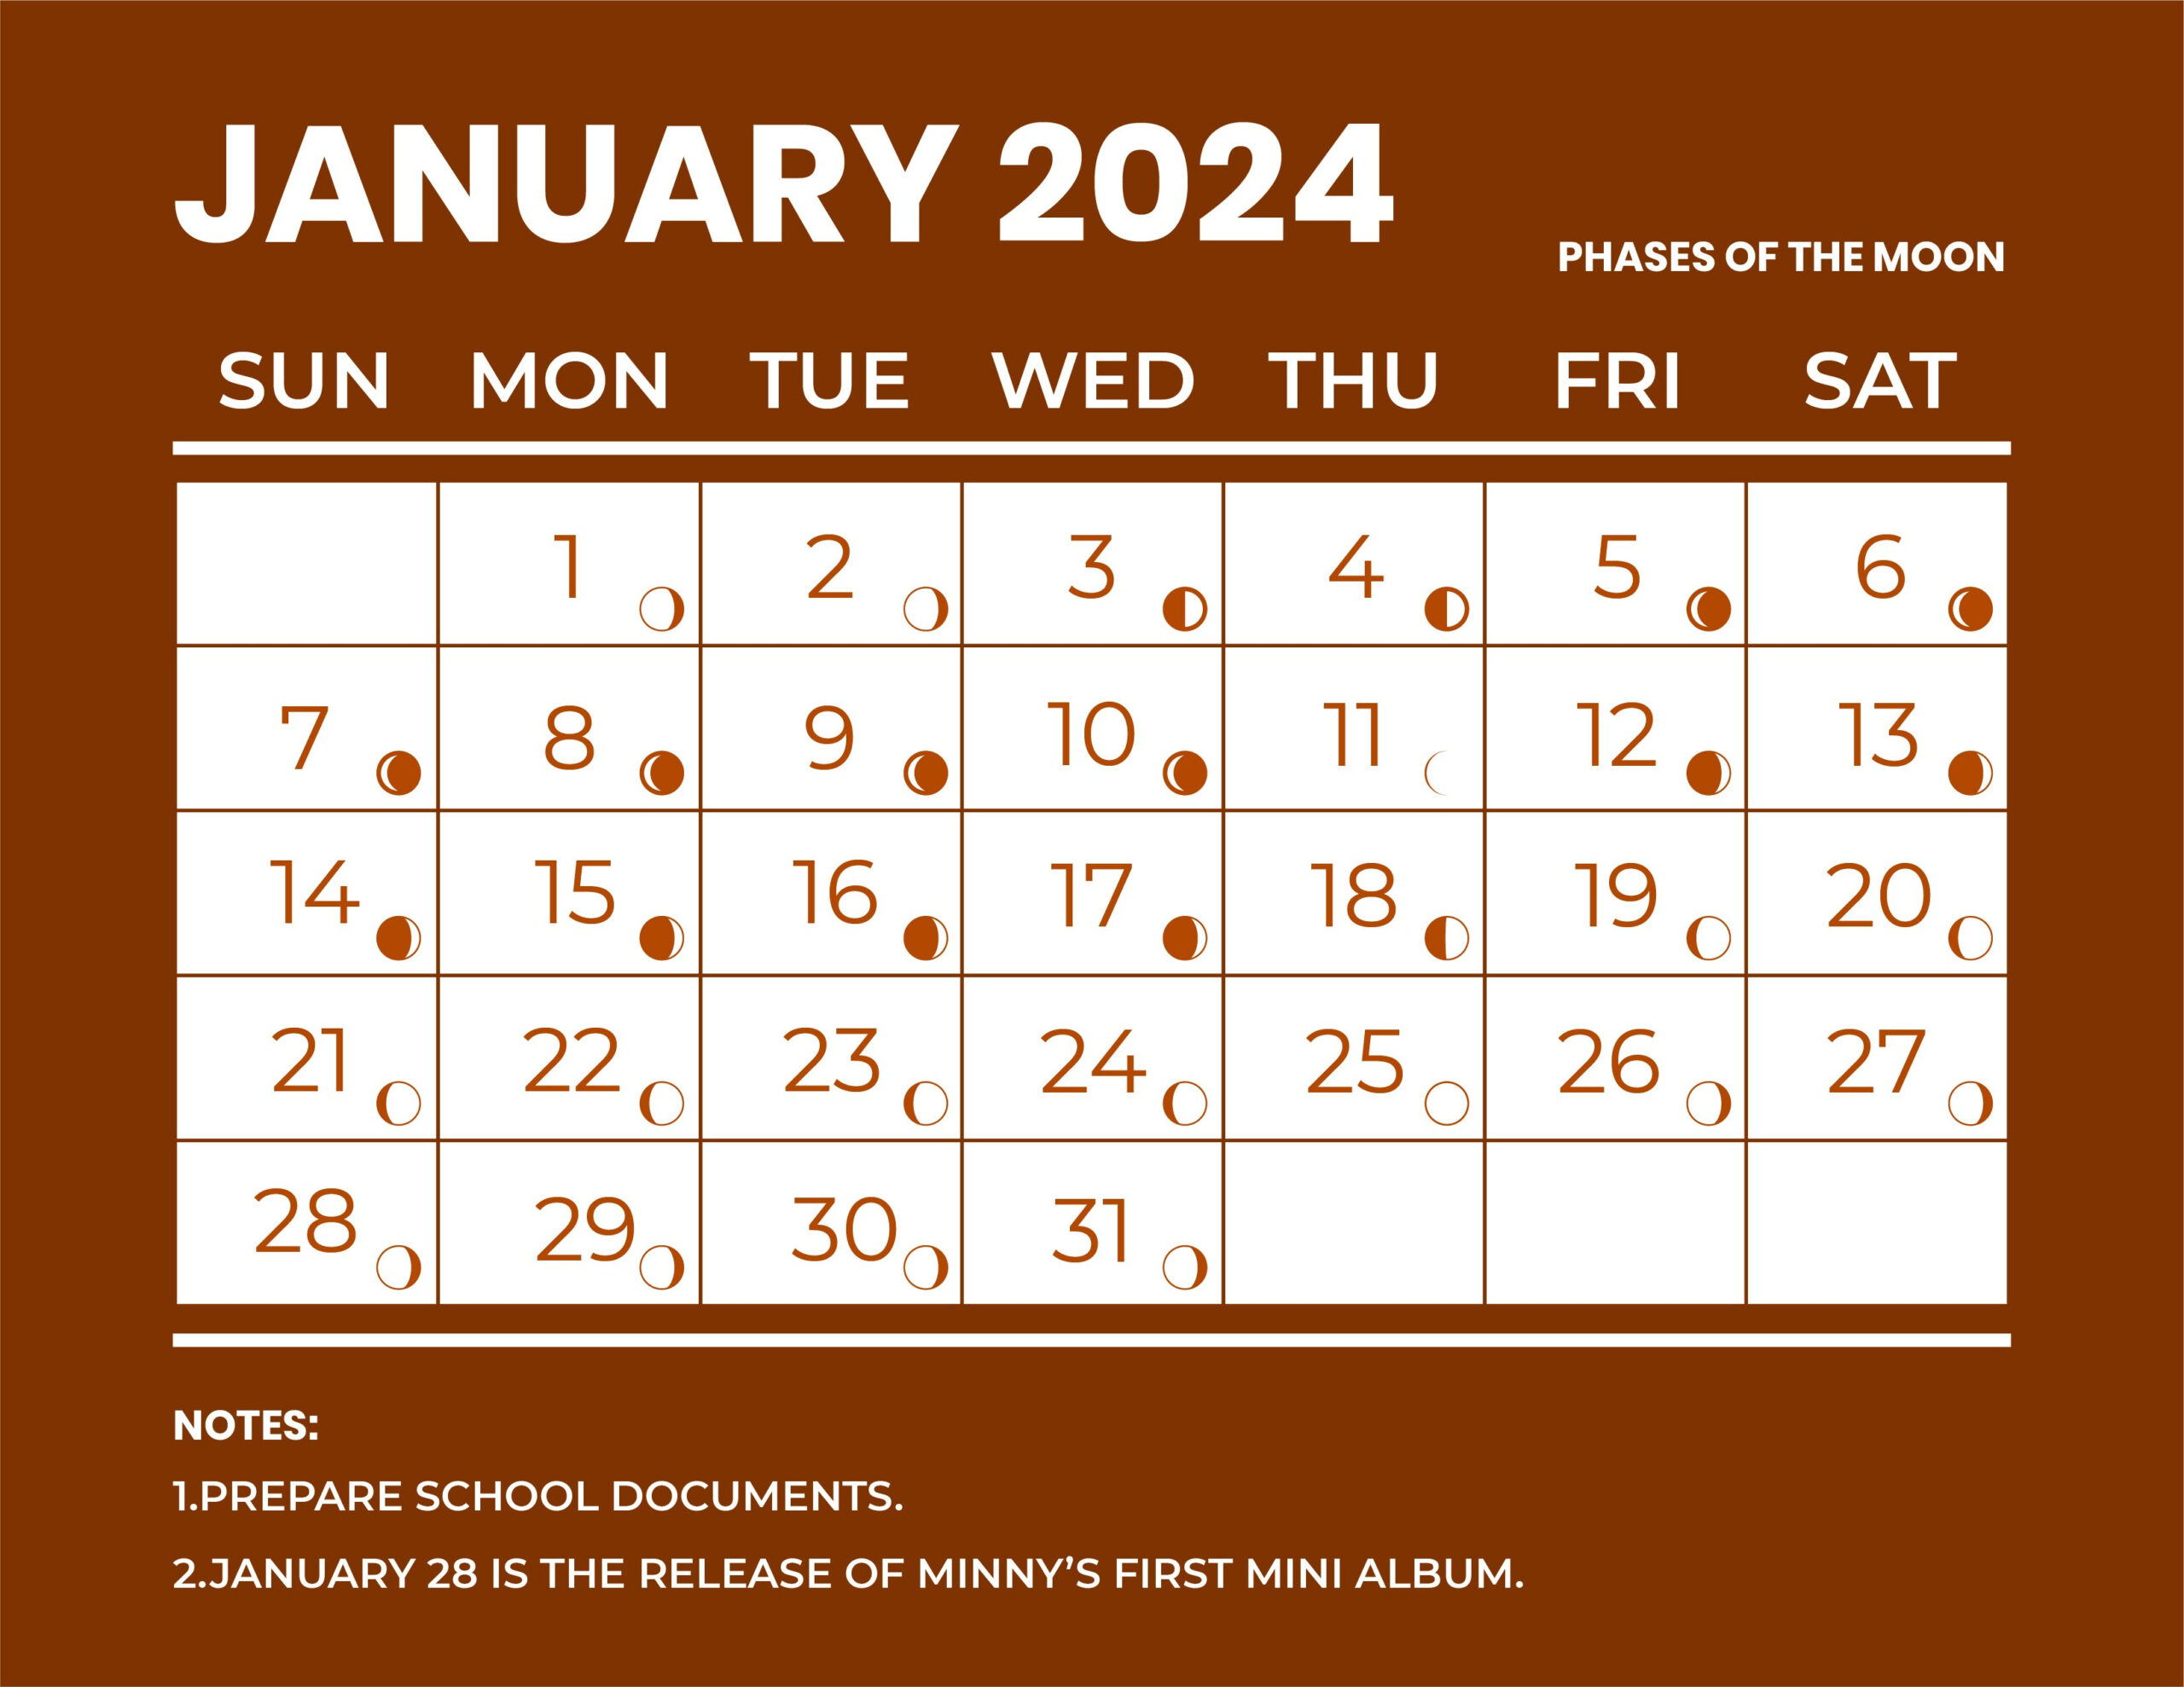 January 2024 Calendar With Moon Phases - Word, Illustrator, Eps for Calendar With Moon Phases 2024 Printable